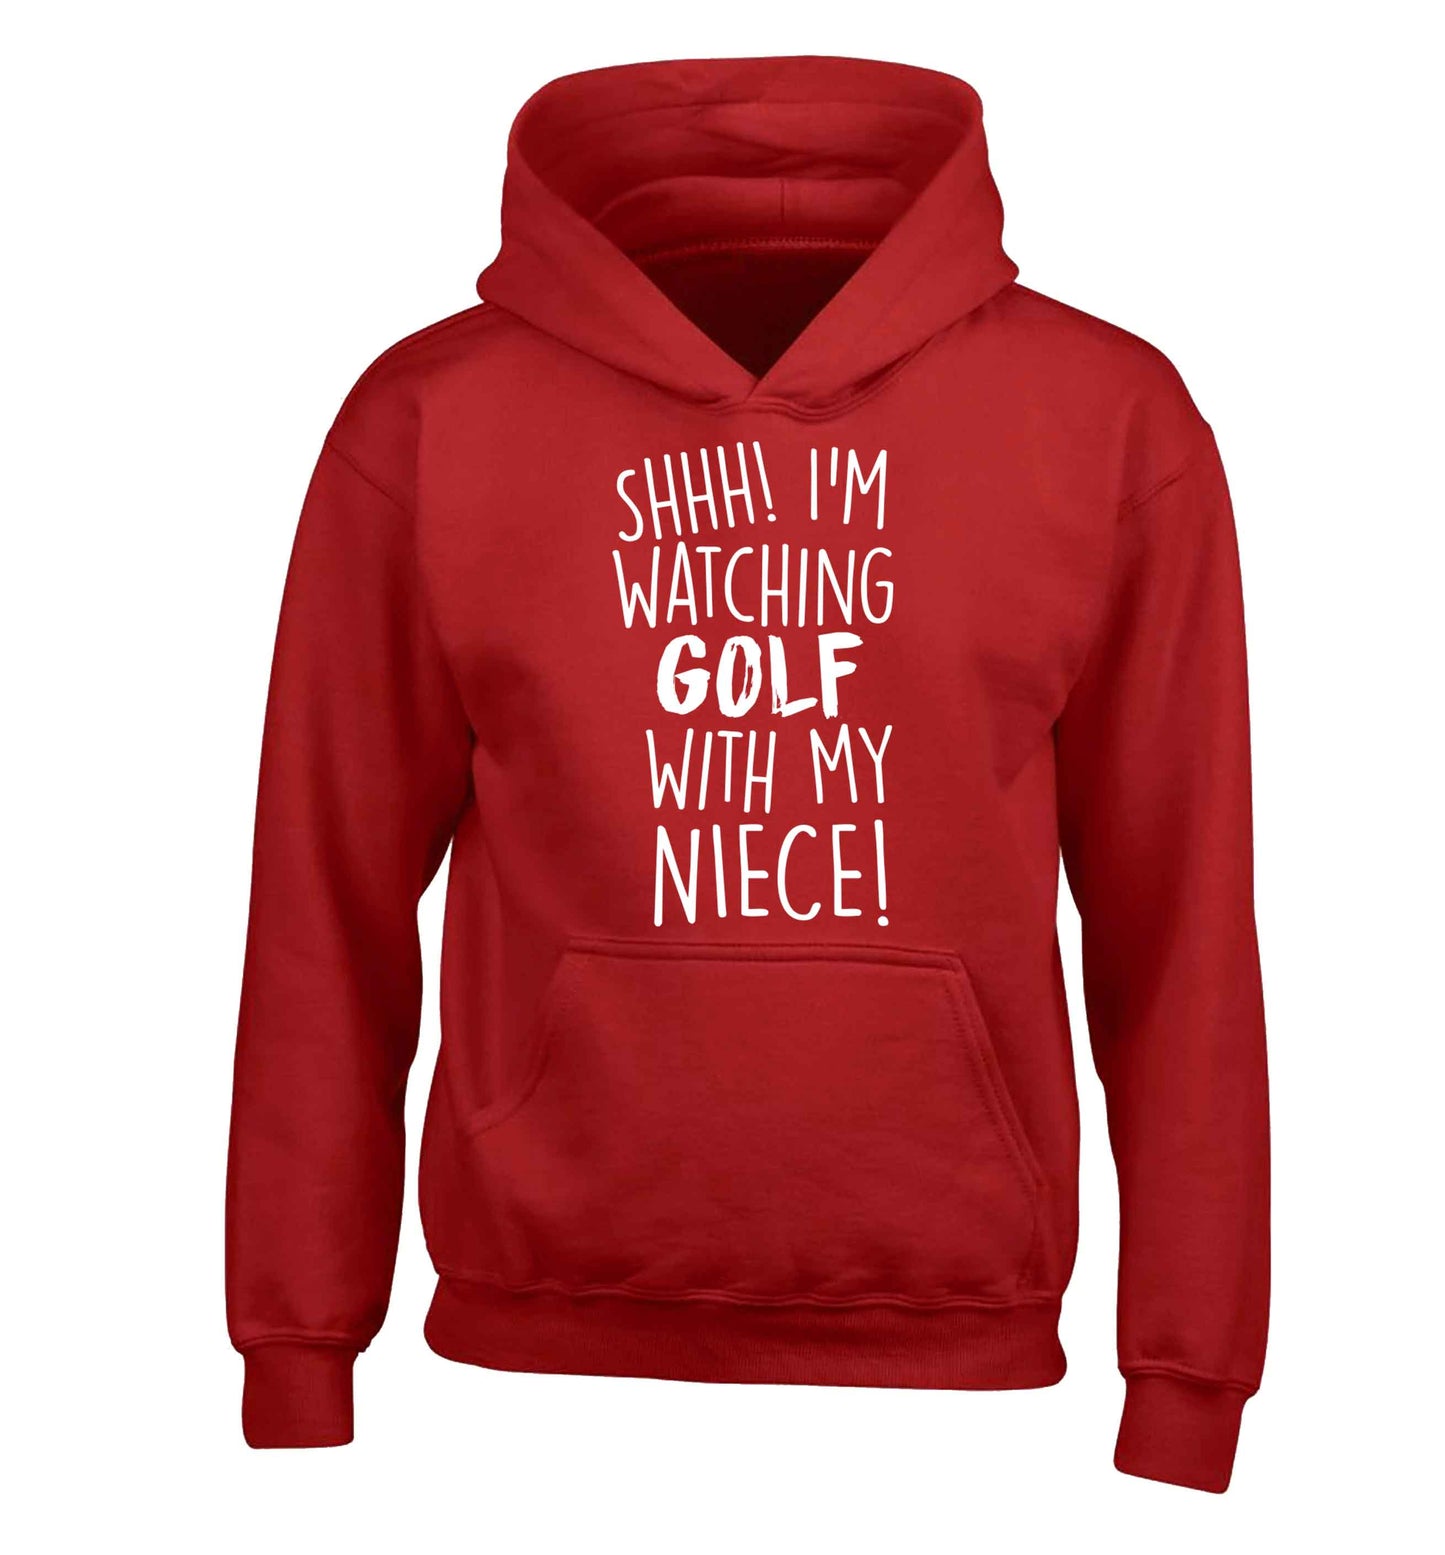 Shh I'm watching golf with my niece children's red hoodie 12-13 Years